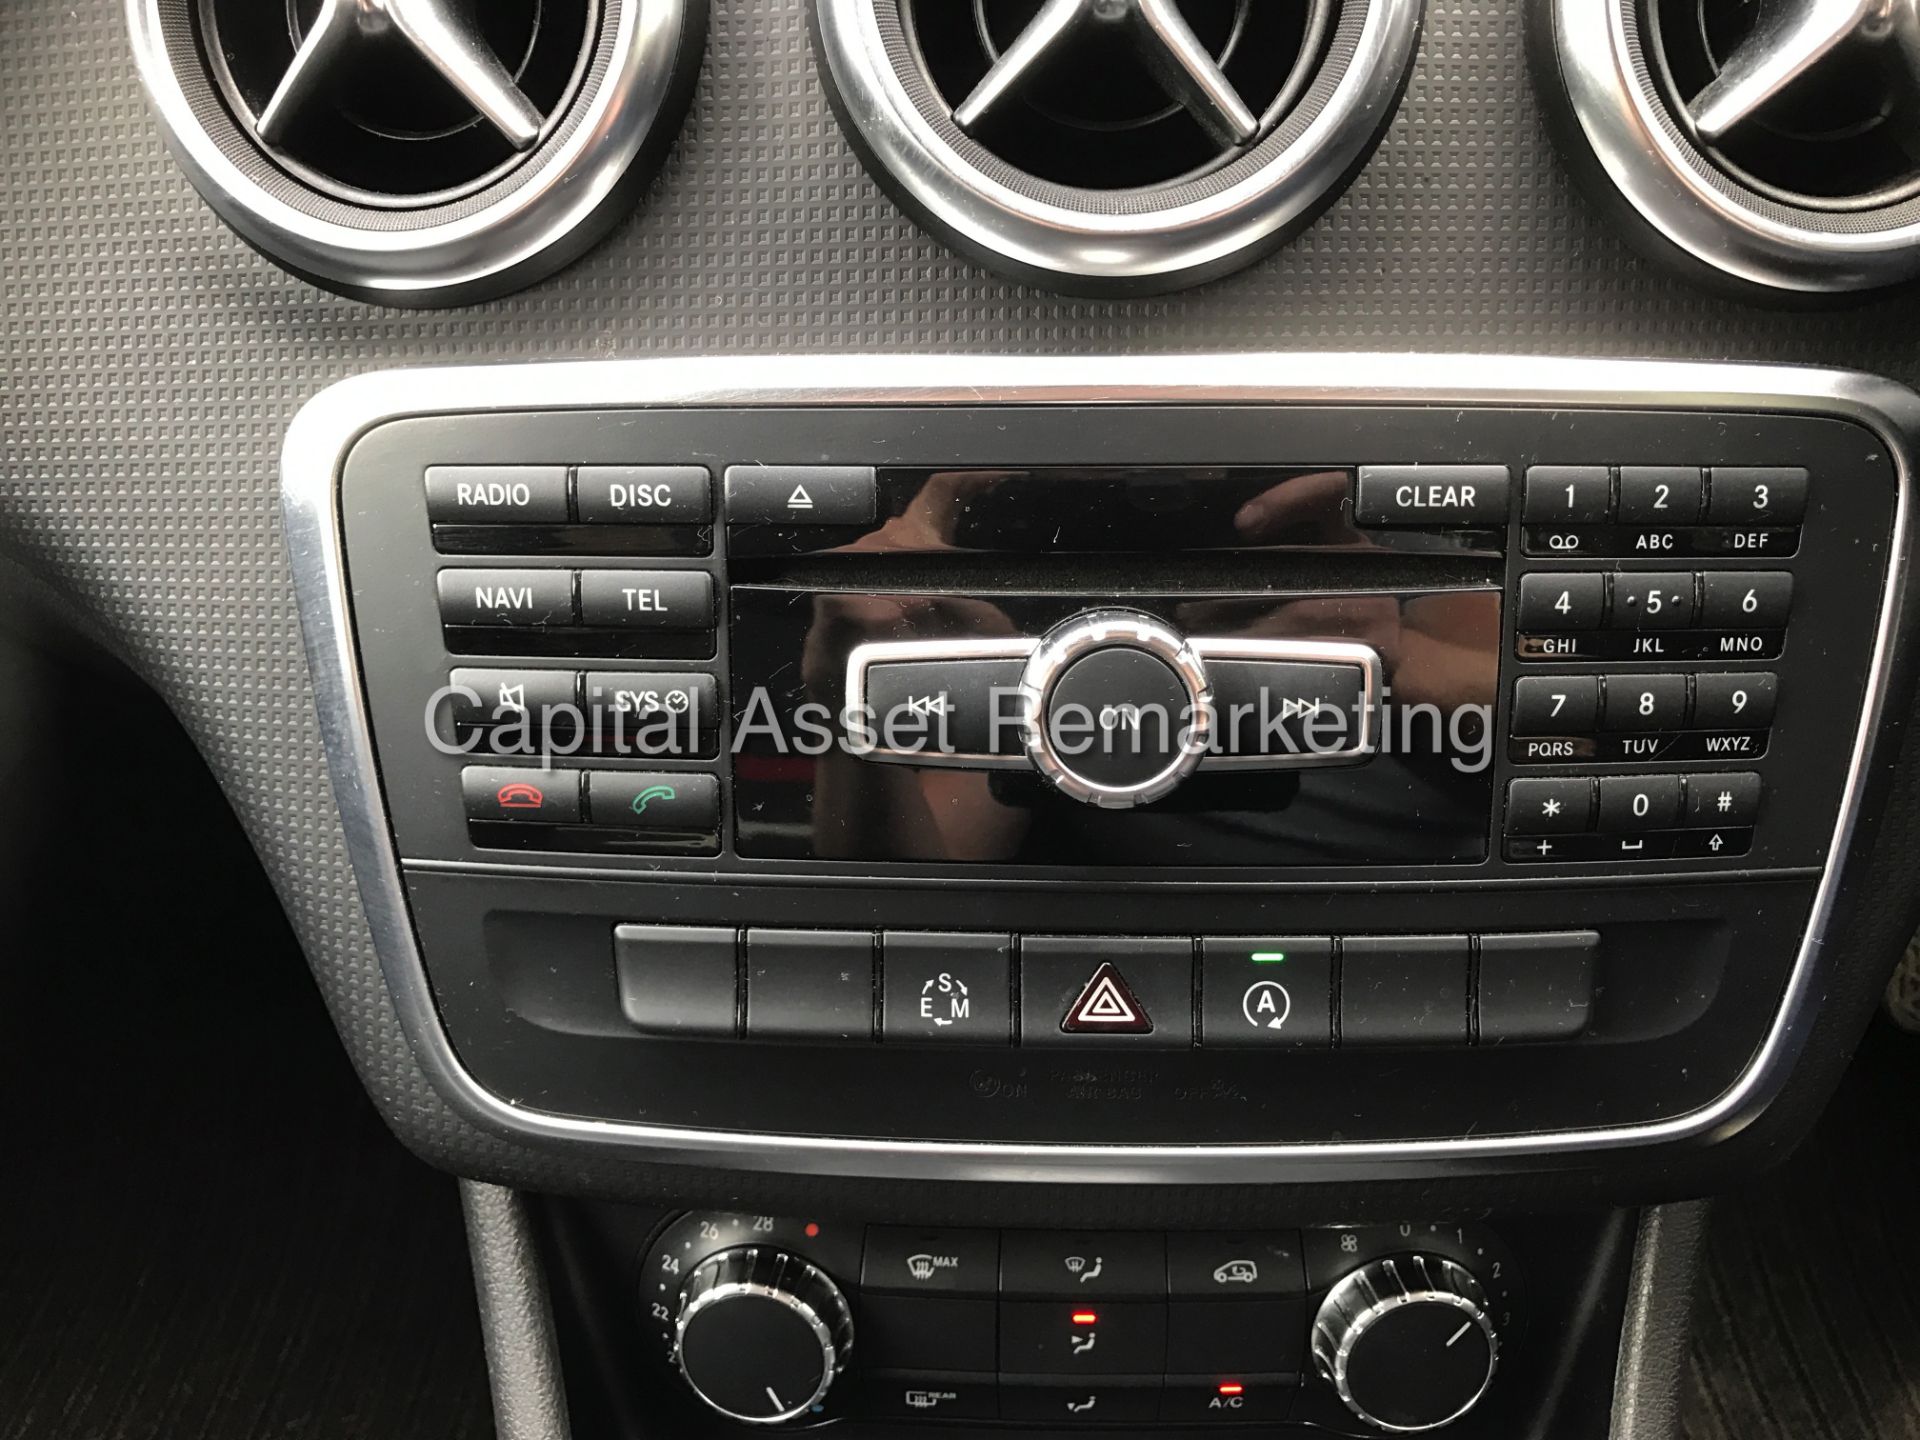 (ON SALE) MERCEDES A180d 7G TRONIC "15 REG" SAT NAV - 1 OWNER - PADDEL SHIFT - CRUISE - AIR CON - Image 18 of 22